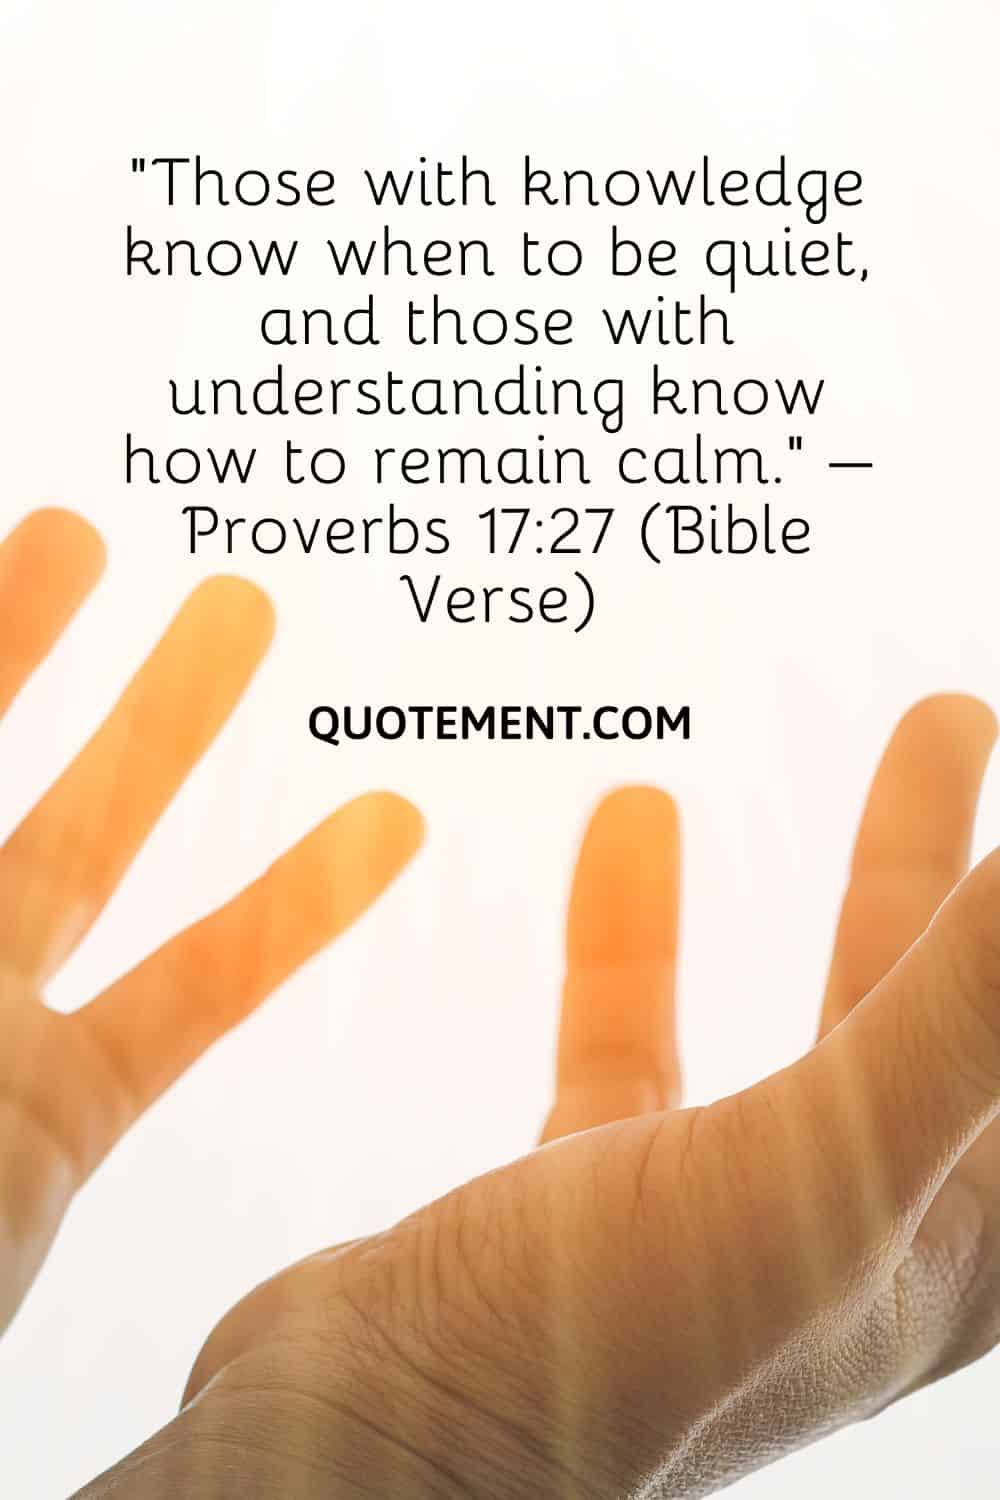 “Those with knowledge know when to be quiet, and those with understanding know how to remain calm.” – Proverbs 1727 (Bible Verse)